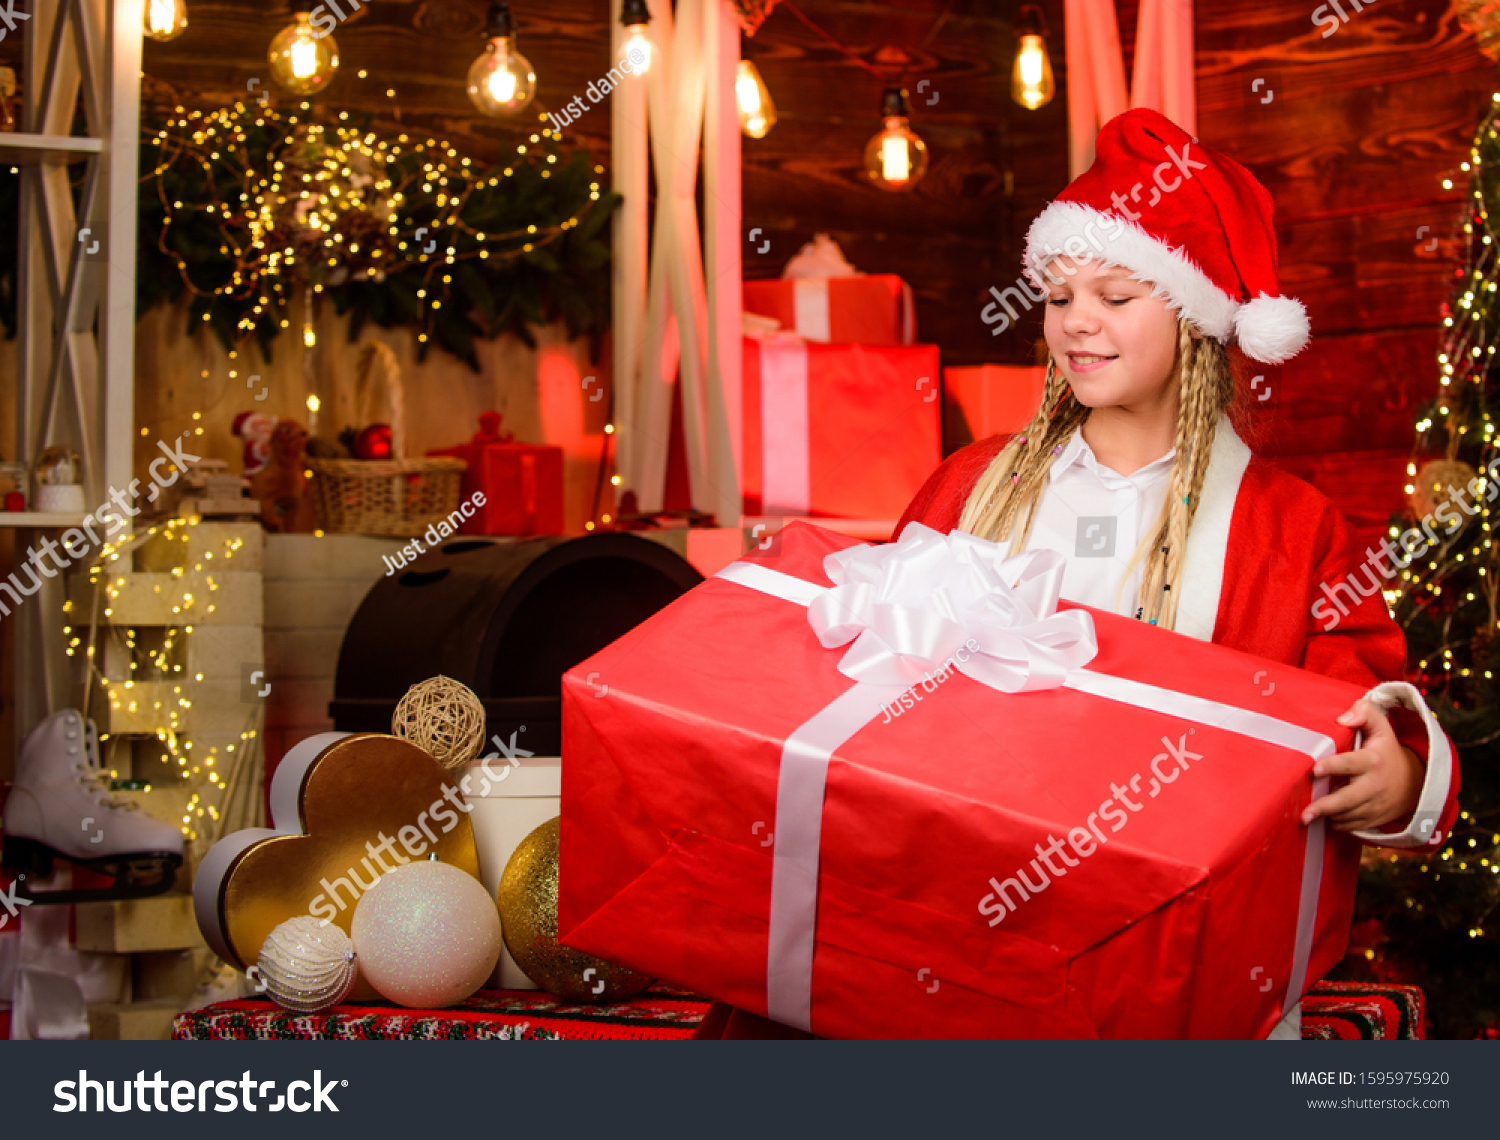 magical joy. kid with present box. winter shopping sale. cheerful little girl at christmas tree. decorate home with joy. xmas mood. family holiday celebration. happy new year. child in red santa hat. #1595975920